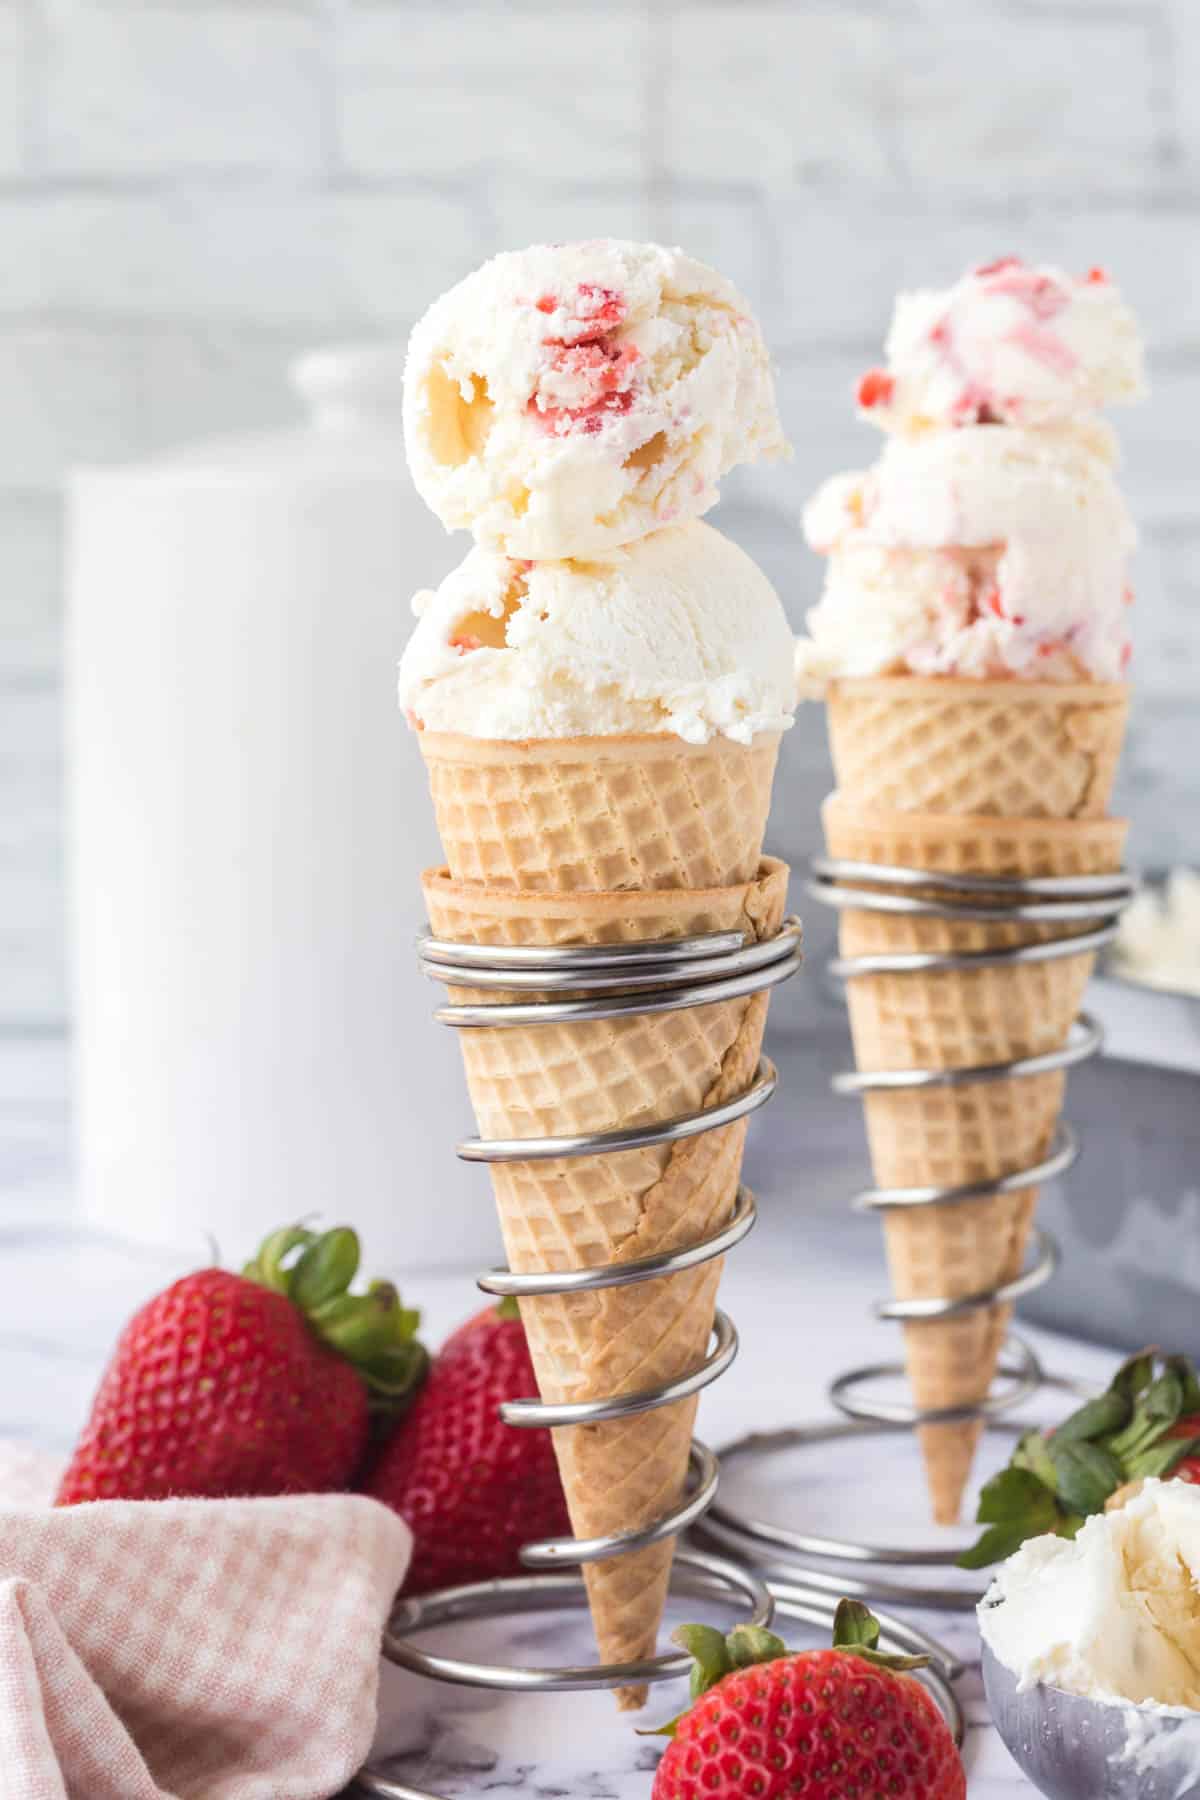 Two ice cream cones filled with strawberry ice cream.